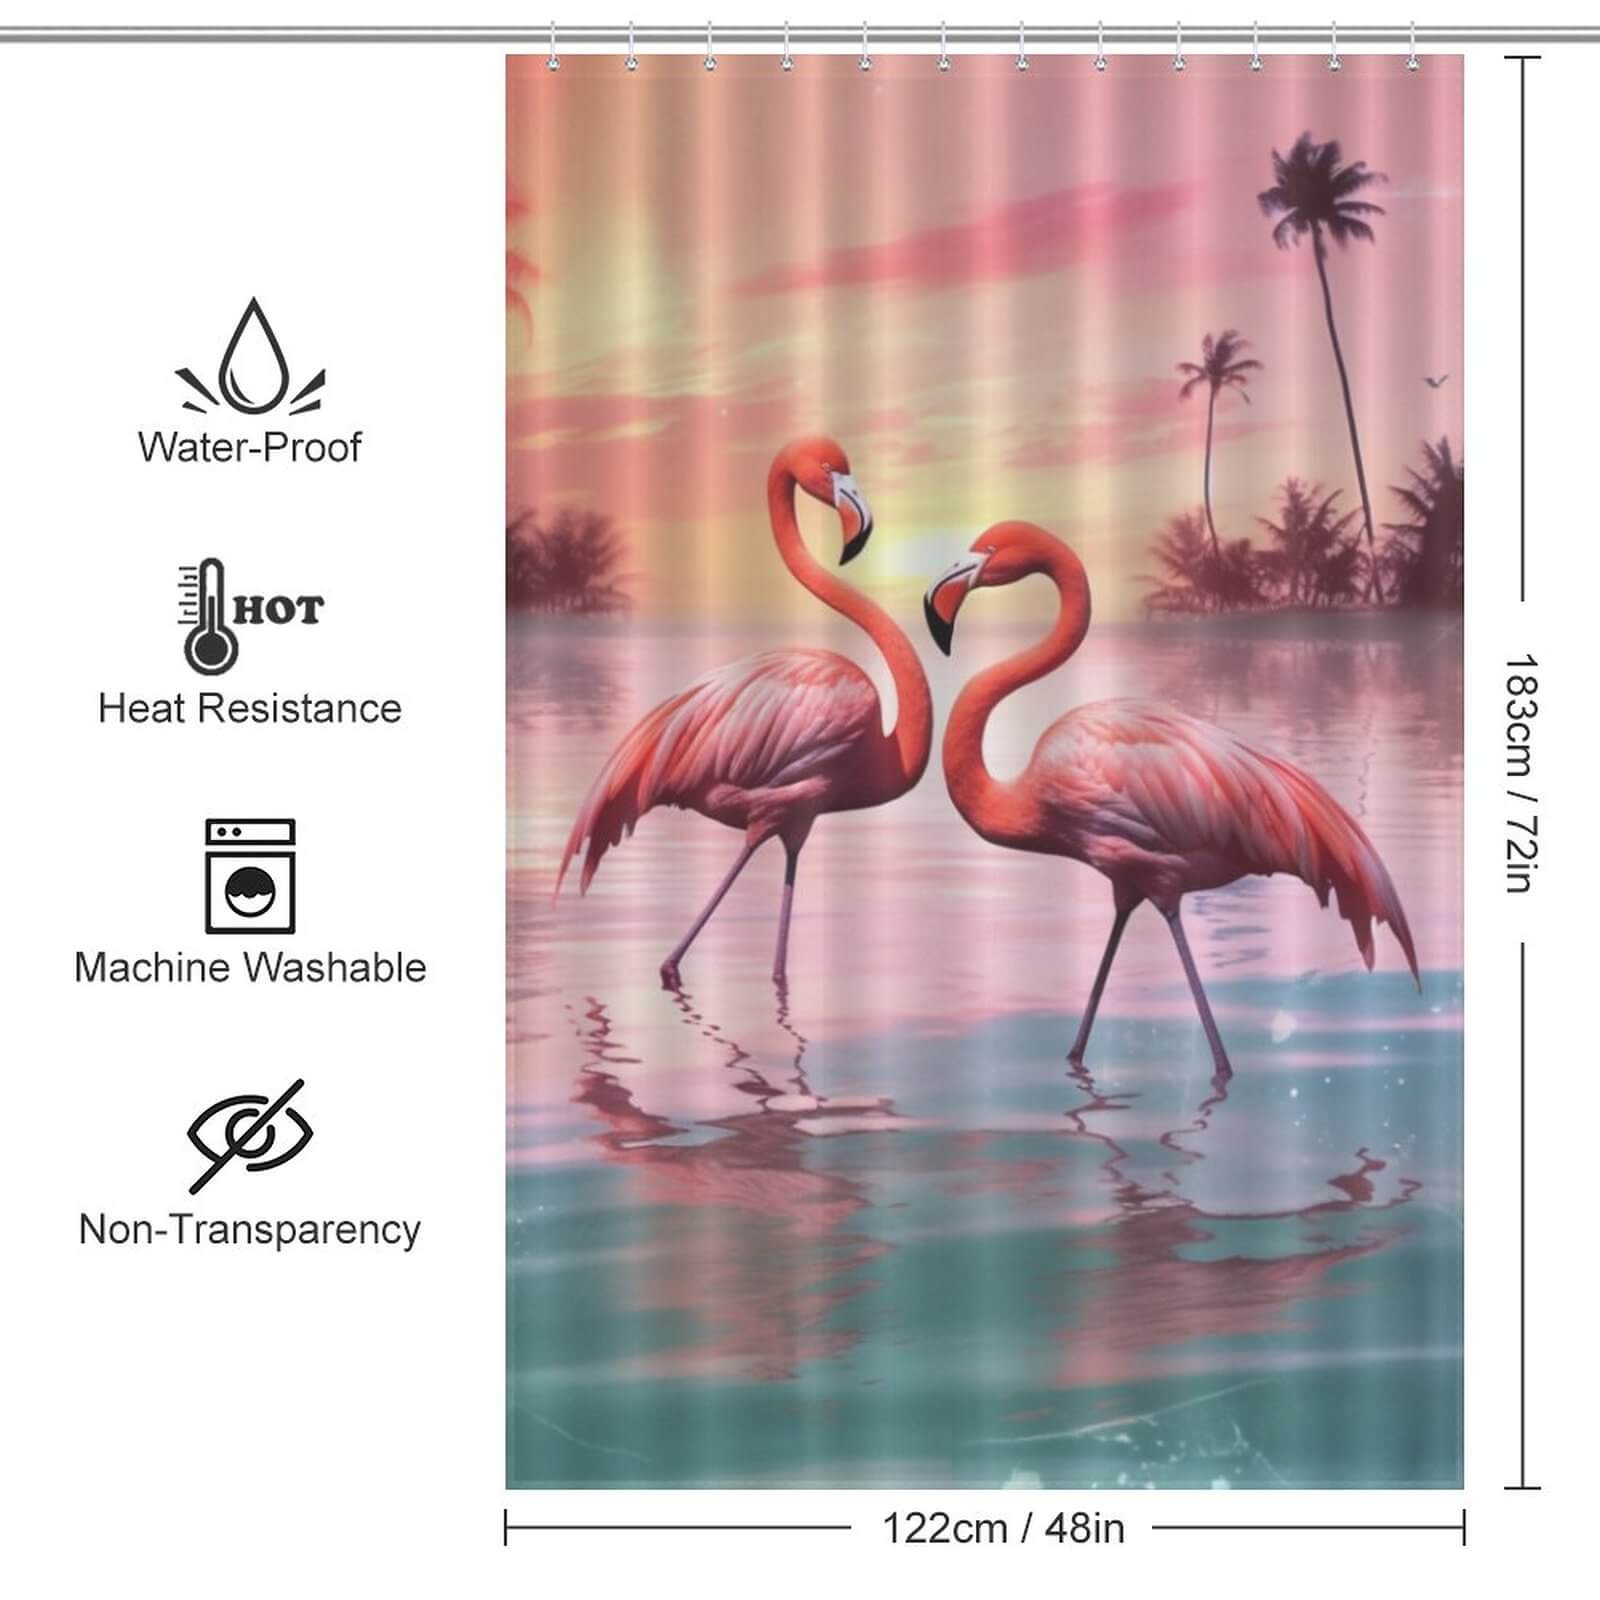 Immerse yourself in a tropical paradise with the Ocean Beach Flamingo Shower Curtain-Cottoncat from Cotton Cat, featuring two elegantly poised flamingos in the water.